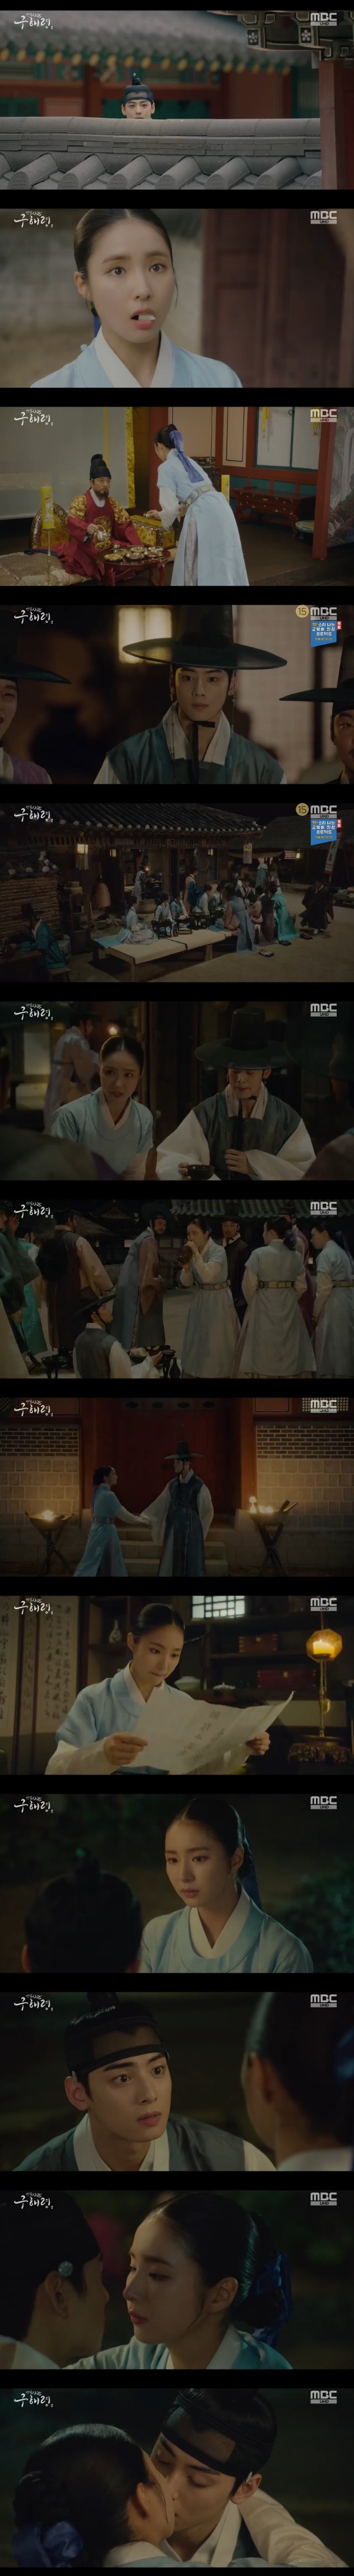 Seoul =) = New cadet Rookie Historian Goo Hae-ryung Shin Se-kyung and Cha Eun-woo shared their first kiss.In the MBC drama The New Entrepreneur Rookie Historian Goo Hae-ryung, which was broadcast on the afternoon of the 22nd, Ada Lovelace Rookie Historian Goo Hae-ryung and Dowon Daegun Yirim (Cha Eun-woo) made a fond kiss in the front yard of the melted party. ...Rookie Historian Goo Hae-ryung was called to King Lee Tae (Kim Min-sang).Because Rookie Historian Goo Hae-ryung knew that he and Min Ik-pyeong (Choi Deok-moon) had written the conversation in his book.Im not sick of it, Lee said to Rookie Historian Goo Hae-ryung. Its a drink with the wages. Drink this and you will put down your duty.Rookie Historian Goo Hae-ryung then said after a drink: Your Grace, Im a little bit too drunk.If you are going to get me drunk, it is useless. Then what do you do to open your mouth? Do you have any sense or do not notice? Do you not know that I am so sorry about that day?When Rookie Historian Goo Hae-ryung replied that he knew, Itae asked, Why do you want to win the king?Rookie Historian Goo Hae-ryung replied: This is a matter of keeping the dominion of the officer.This has led to the wish of Rookie Historian Goo Hae-ryung.As a result, Itae made a direct apology to the court and apologized directly to the officers.The officers cheered on the content that I can enter any place in the future and no one can stop it.After that, the officers of the presiding officers had a dinner. I came to the table by chance. Rookie Historian Goo Hae-ryung said, Why are you here?I will give it to me in the future. When the senior officers continued to recommend alcohol to Irim, Rookie Historian Goo Hae-ryung acted as a black knight and laughed.Rookie Historian Goo Hae-ryung took Leerim; Leem went to make honey water himself, worried about Rookie Historian Goo Hae-ryung.In the meantime, Rookie Historian Goo Hae-ryung, who found the article in his room, was impressed by the heartfelt writing.Irim was worried when he saw Rookie Historian Goo Hae-ryung, who brought honey water but said nothing.Rookie Historian Goo Hae-ryung then approached Irim with the words My love has lived for a long time and becomes my master and gave Kiss with affection.Meanwhile, New Entrepreneur Rookie Historian Goo Hae-ryung is a drama depicting the first problematic Ada Lovelace () Rookie Historian Goo Hae-ryung of Joseon and the Phil full romance annals of Prince Irim, the anti-war mother solo, broadcast every Wednesday and Thursday at 8:55 pm.